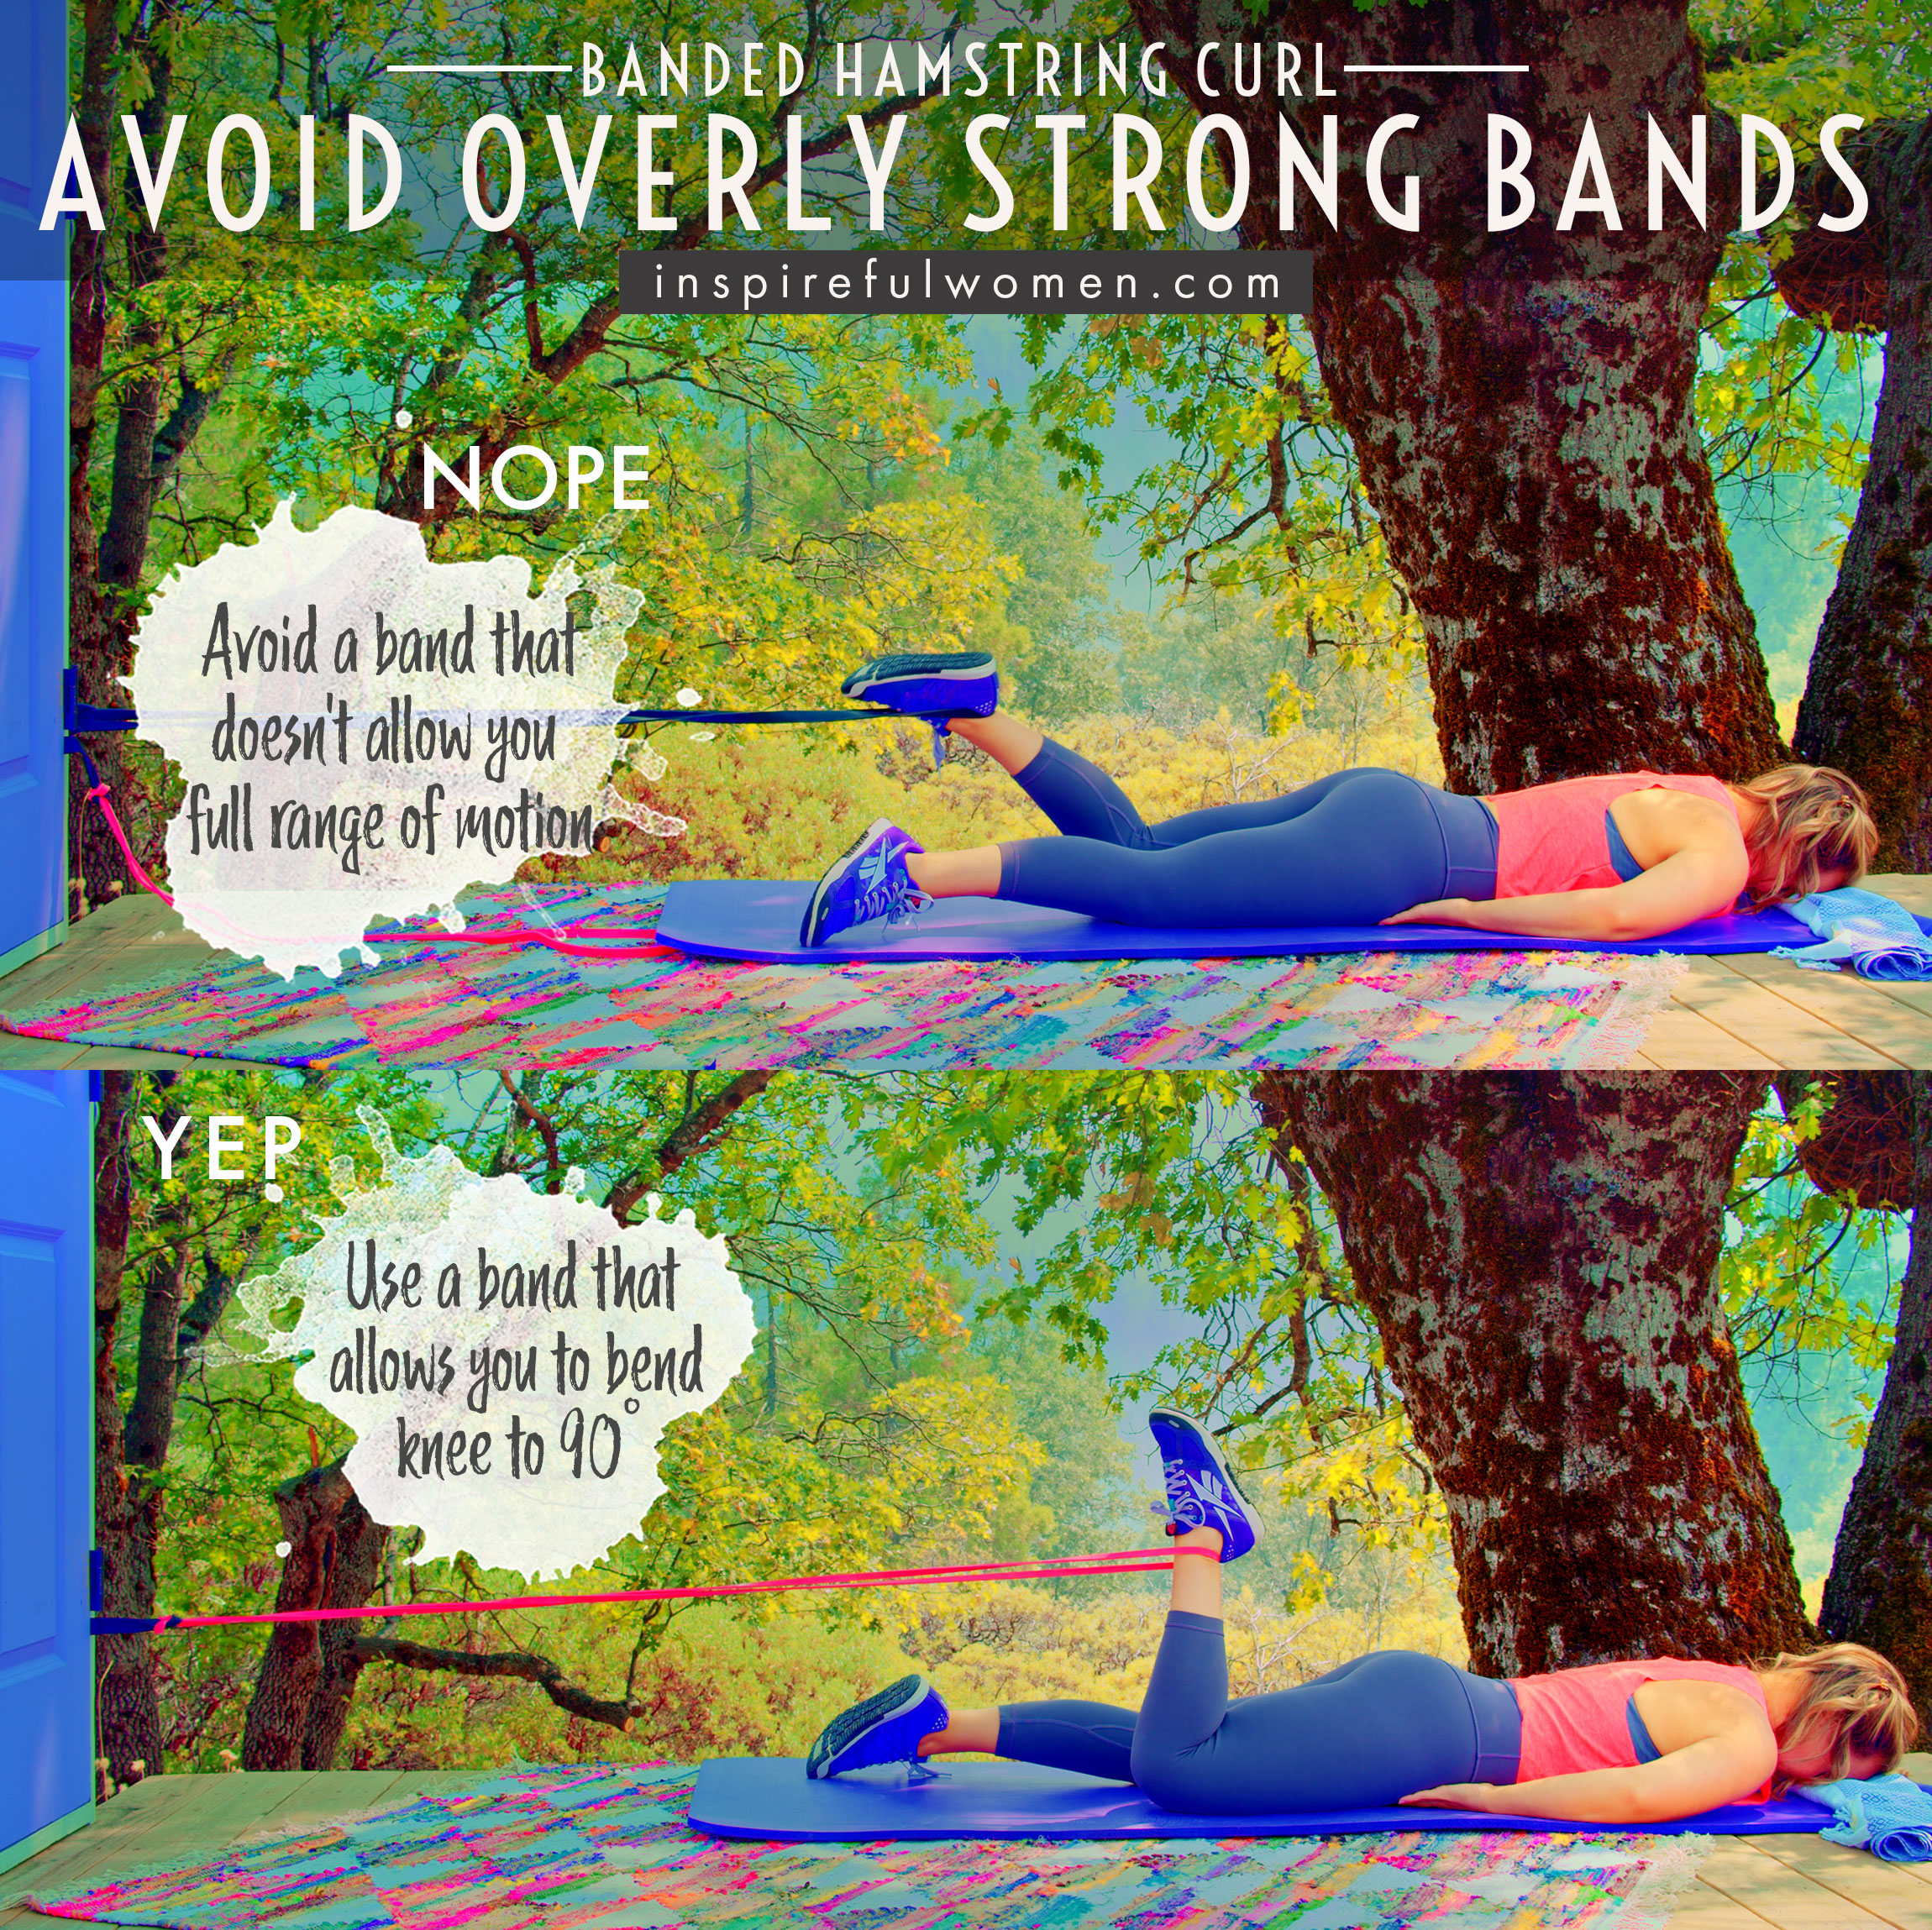 lying-resistance-band-hamstring-curls-avoid-overly-strong-band-use-band-allows-you-bend-knee-90-degrees